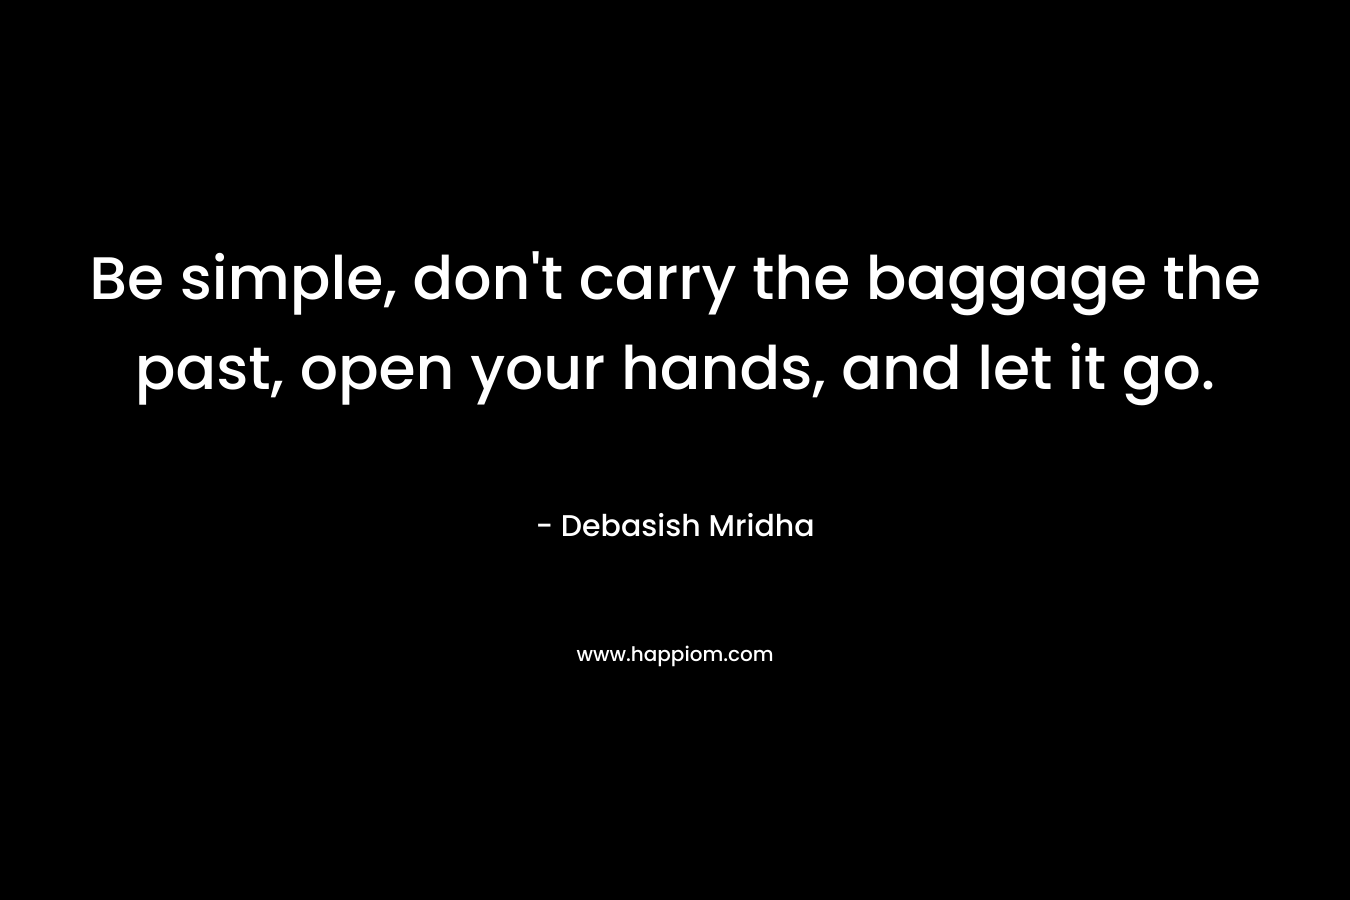 Be simple, don't carry the baggage the past, open your hands, and let it go.